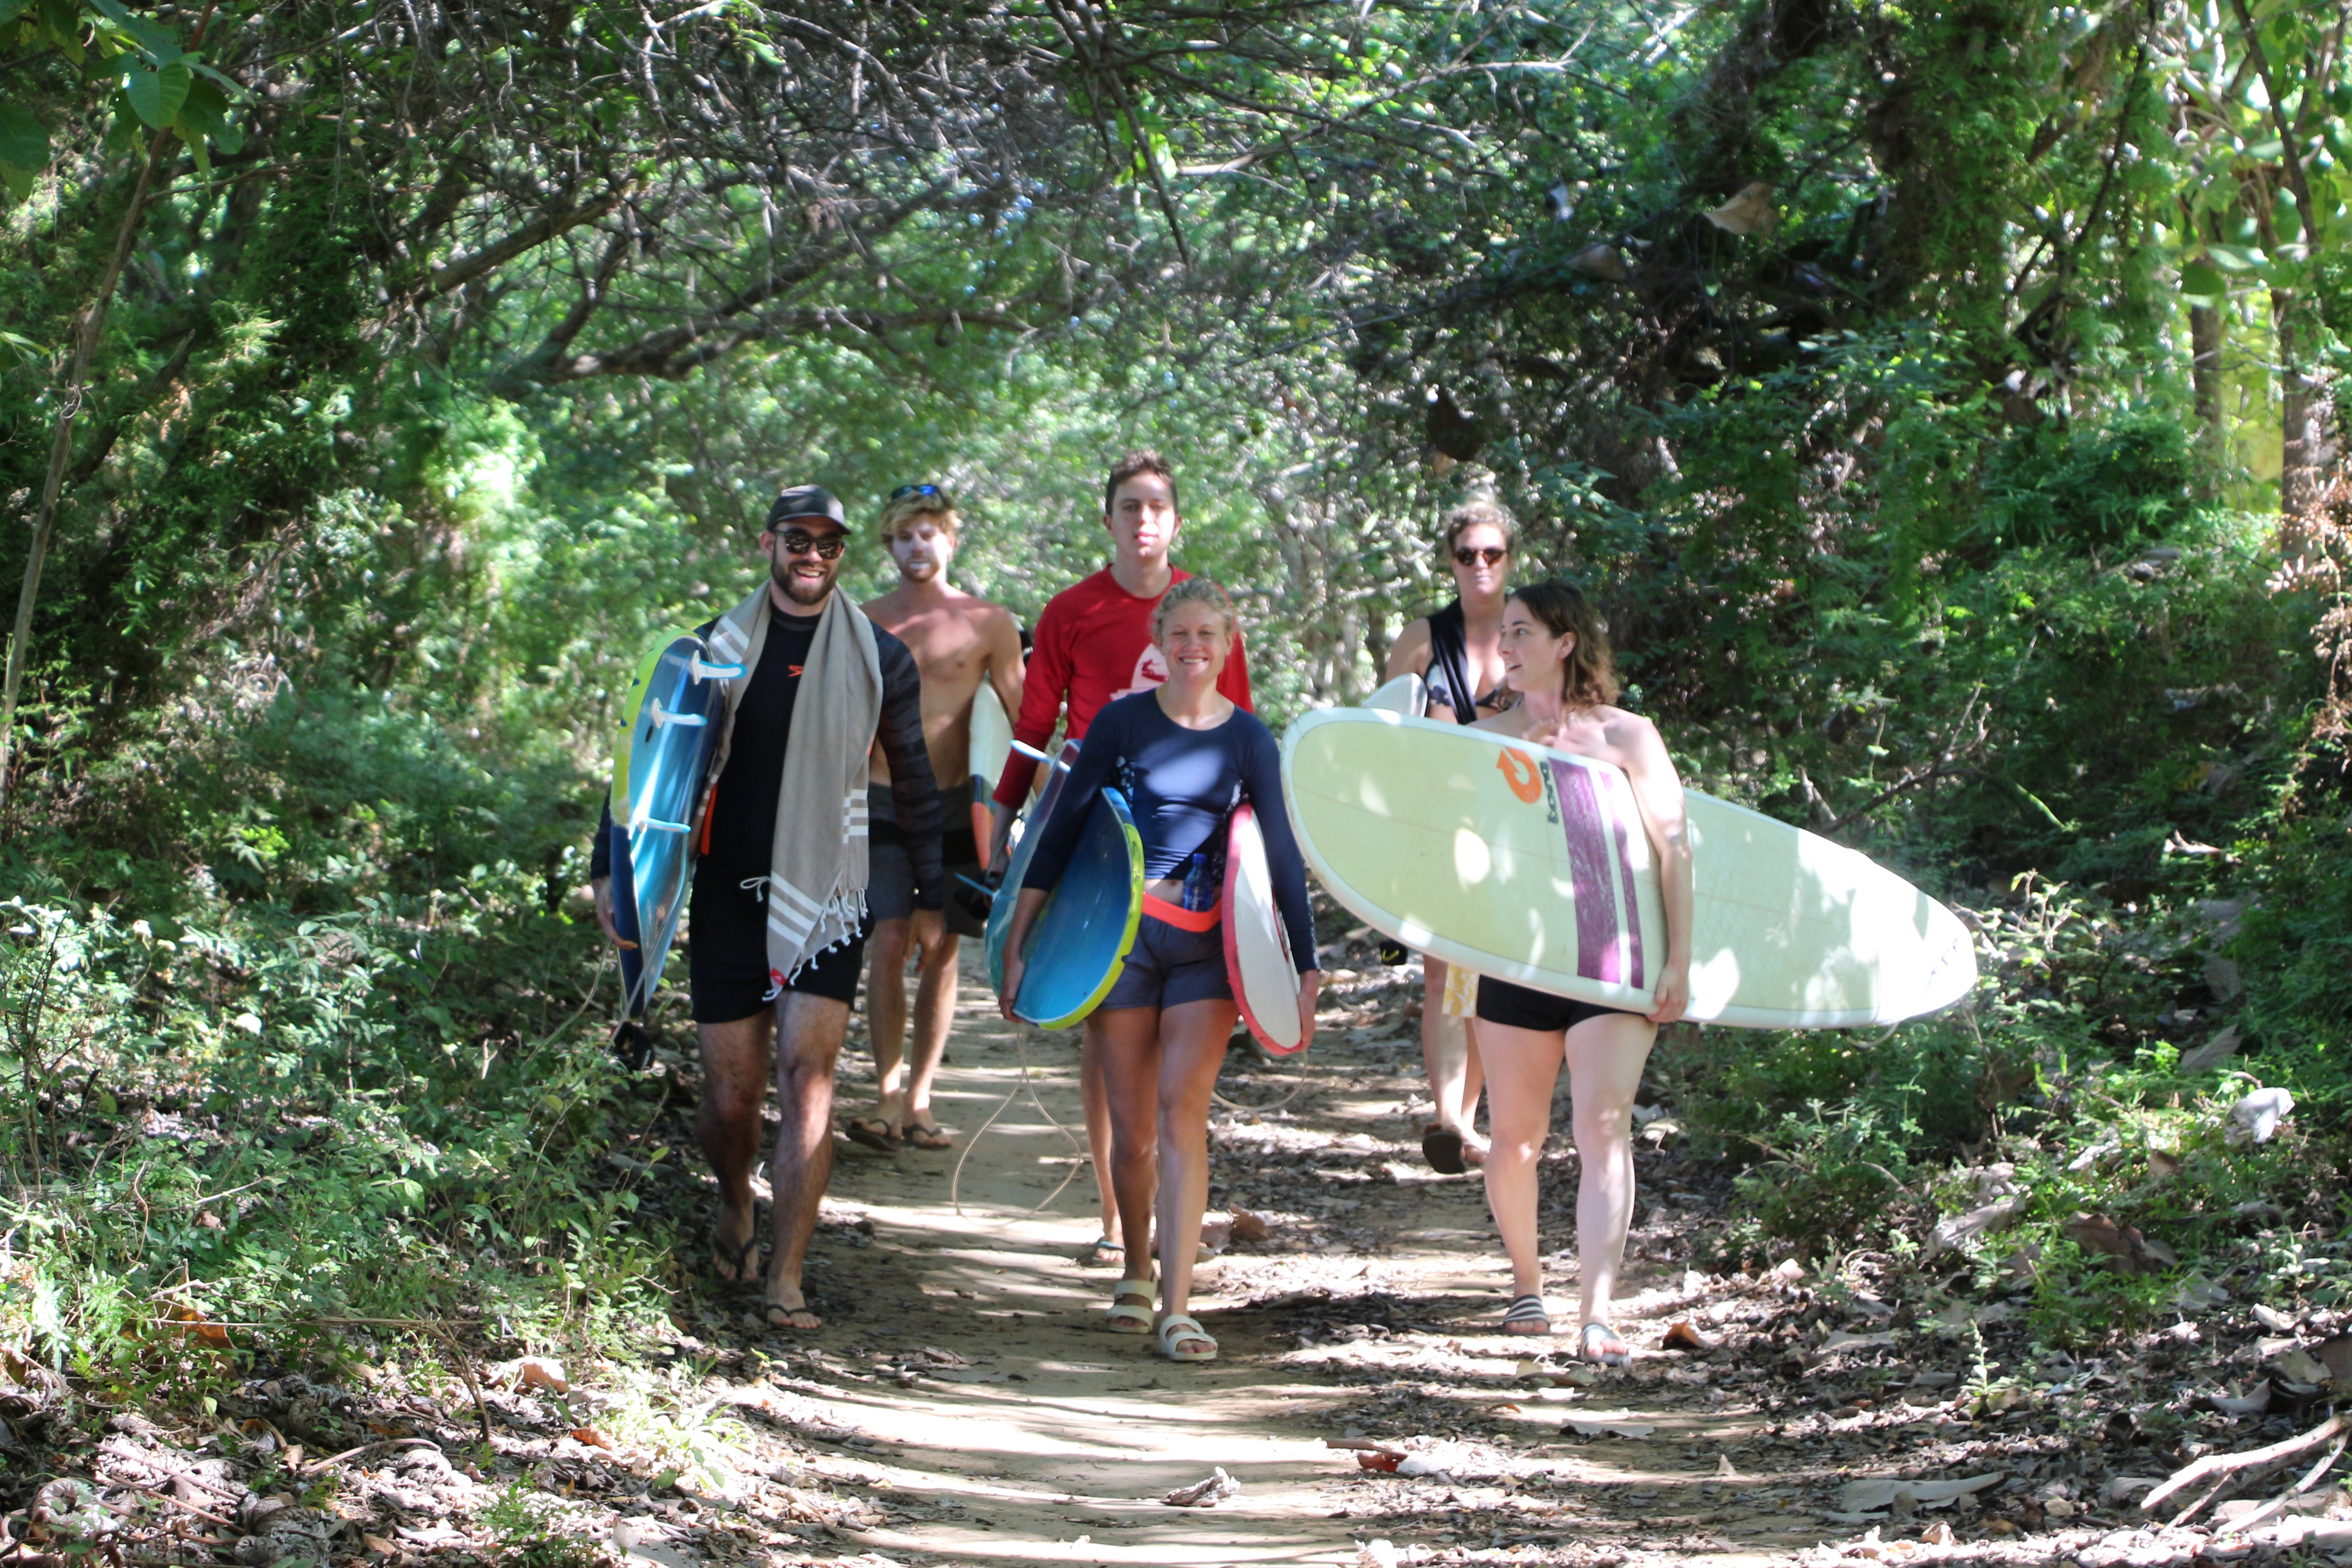 A typical day at Los Clavos Surf Camp & Yoga Retreat 